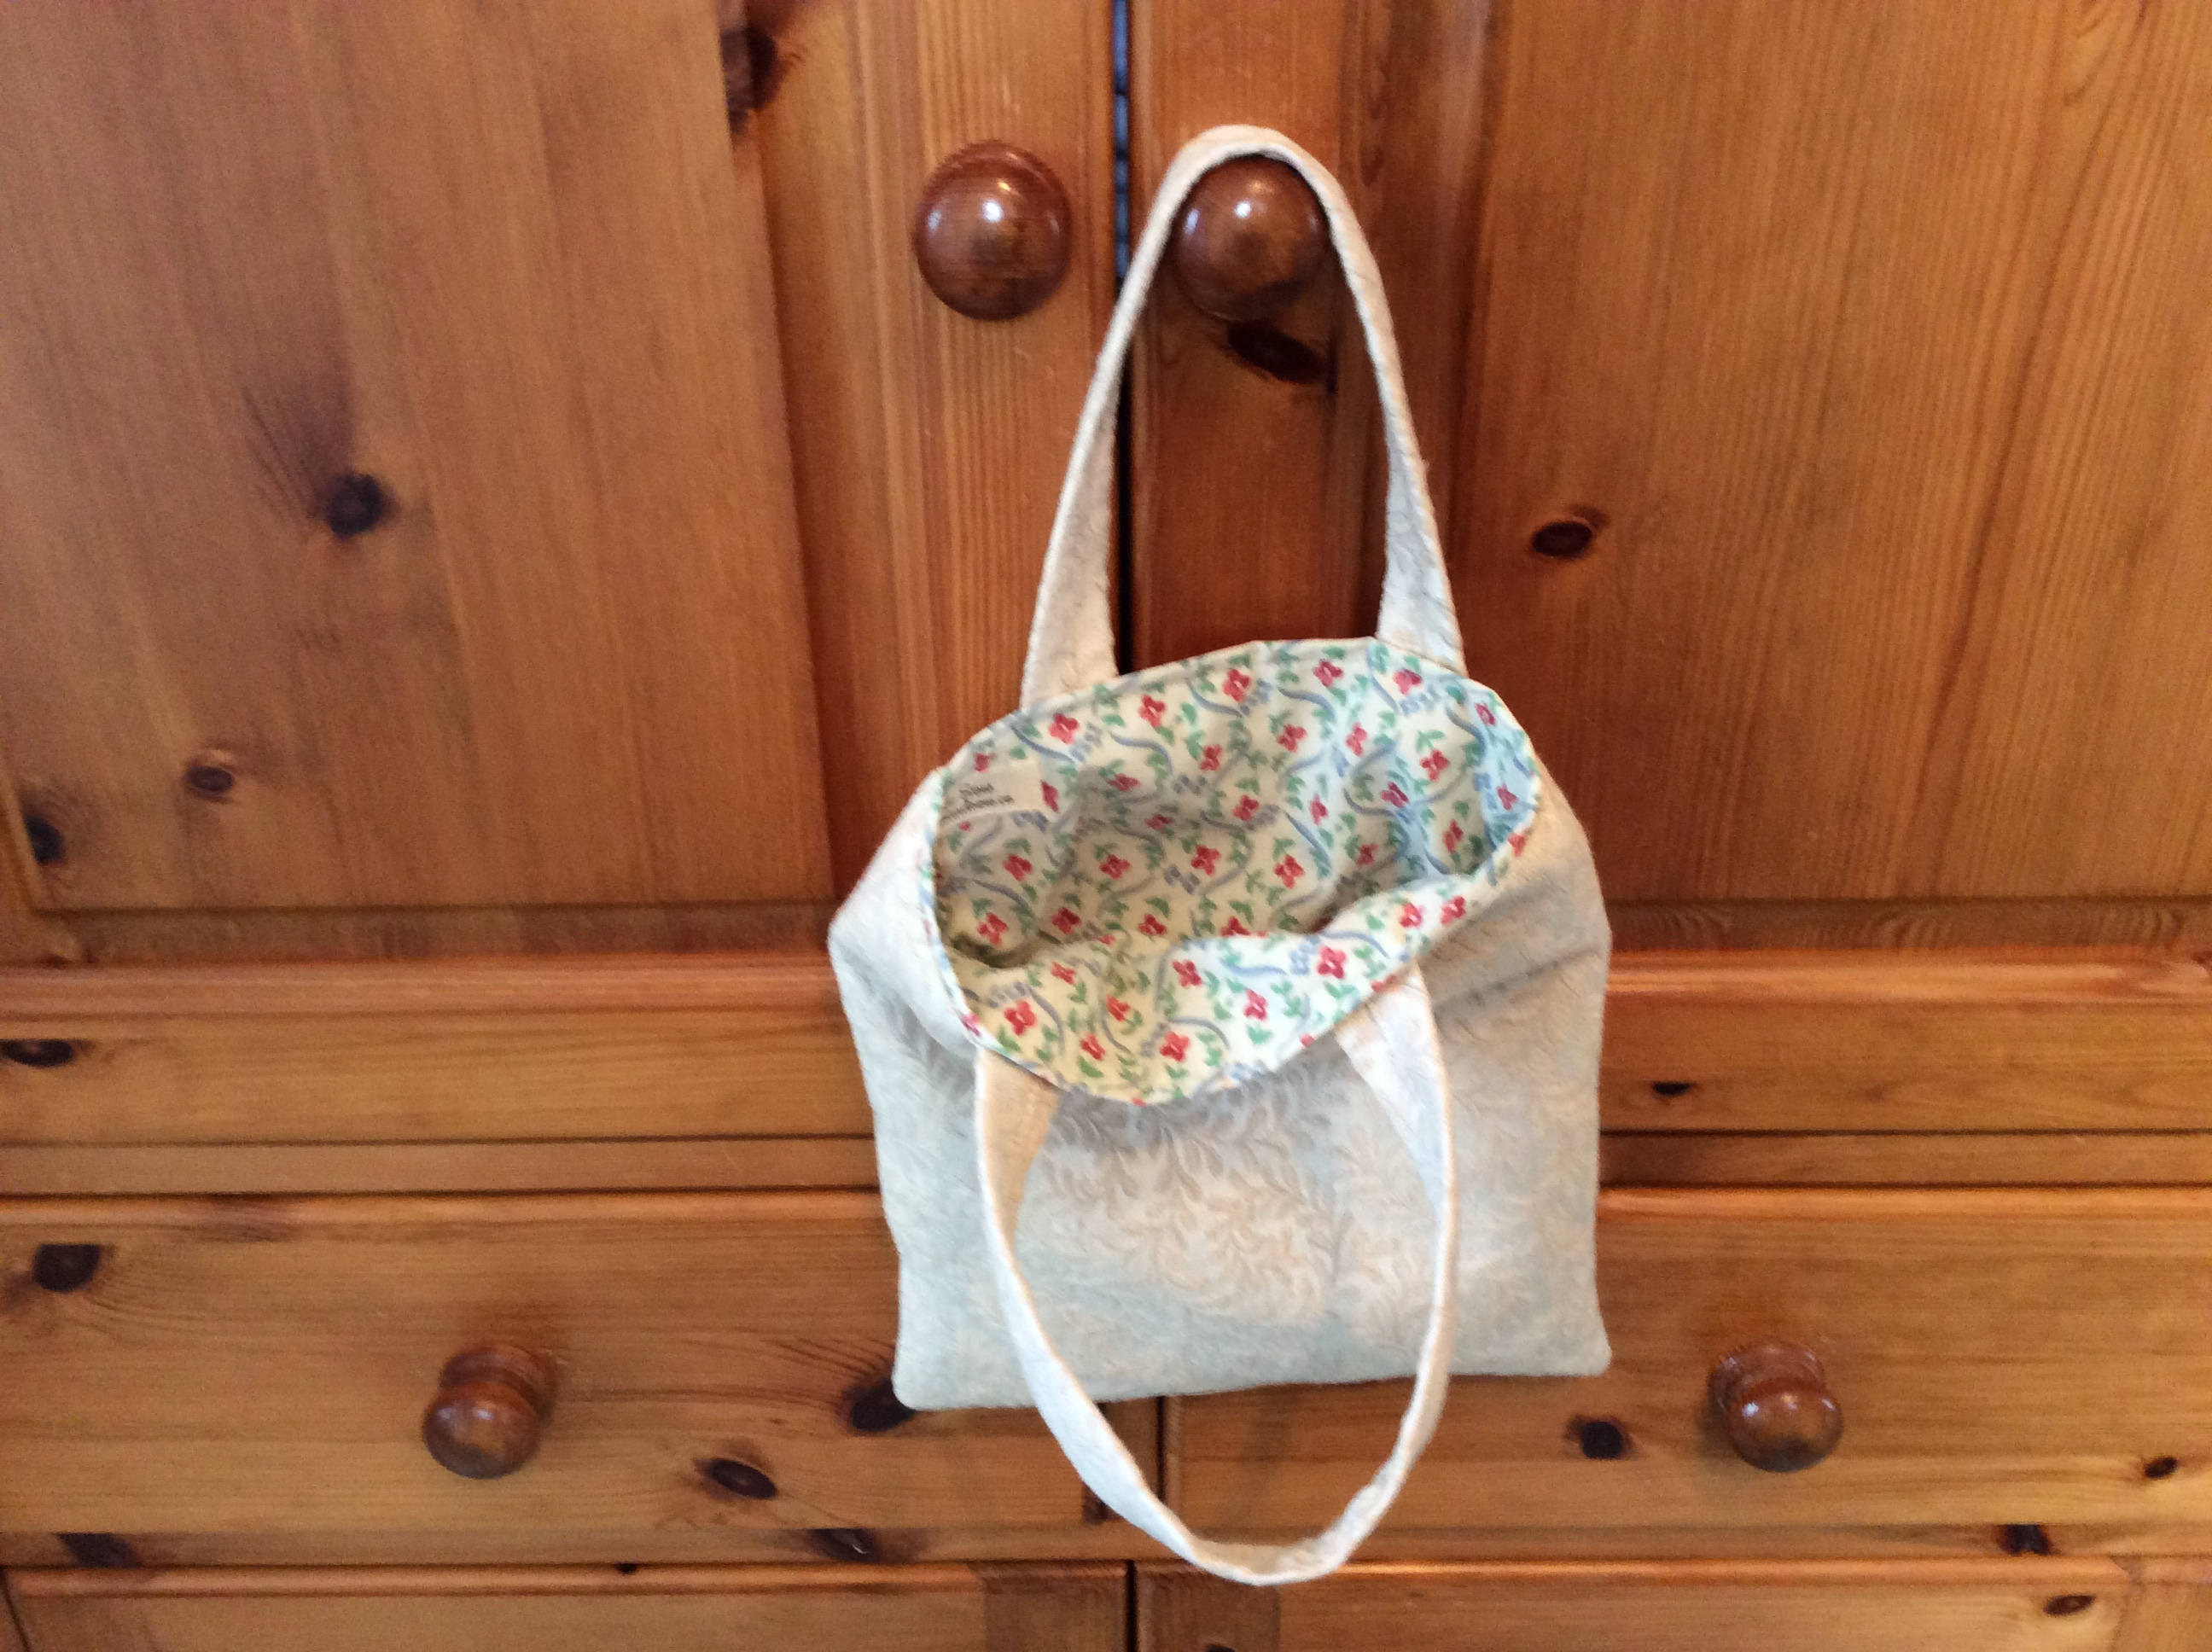 Small Tote Bag - cream and flowers